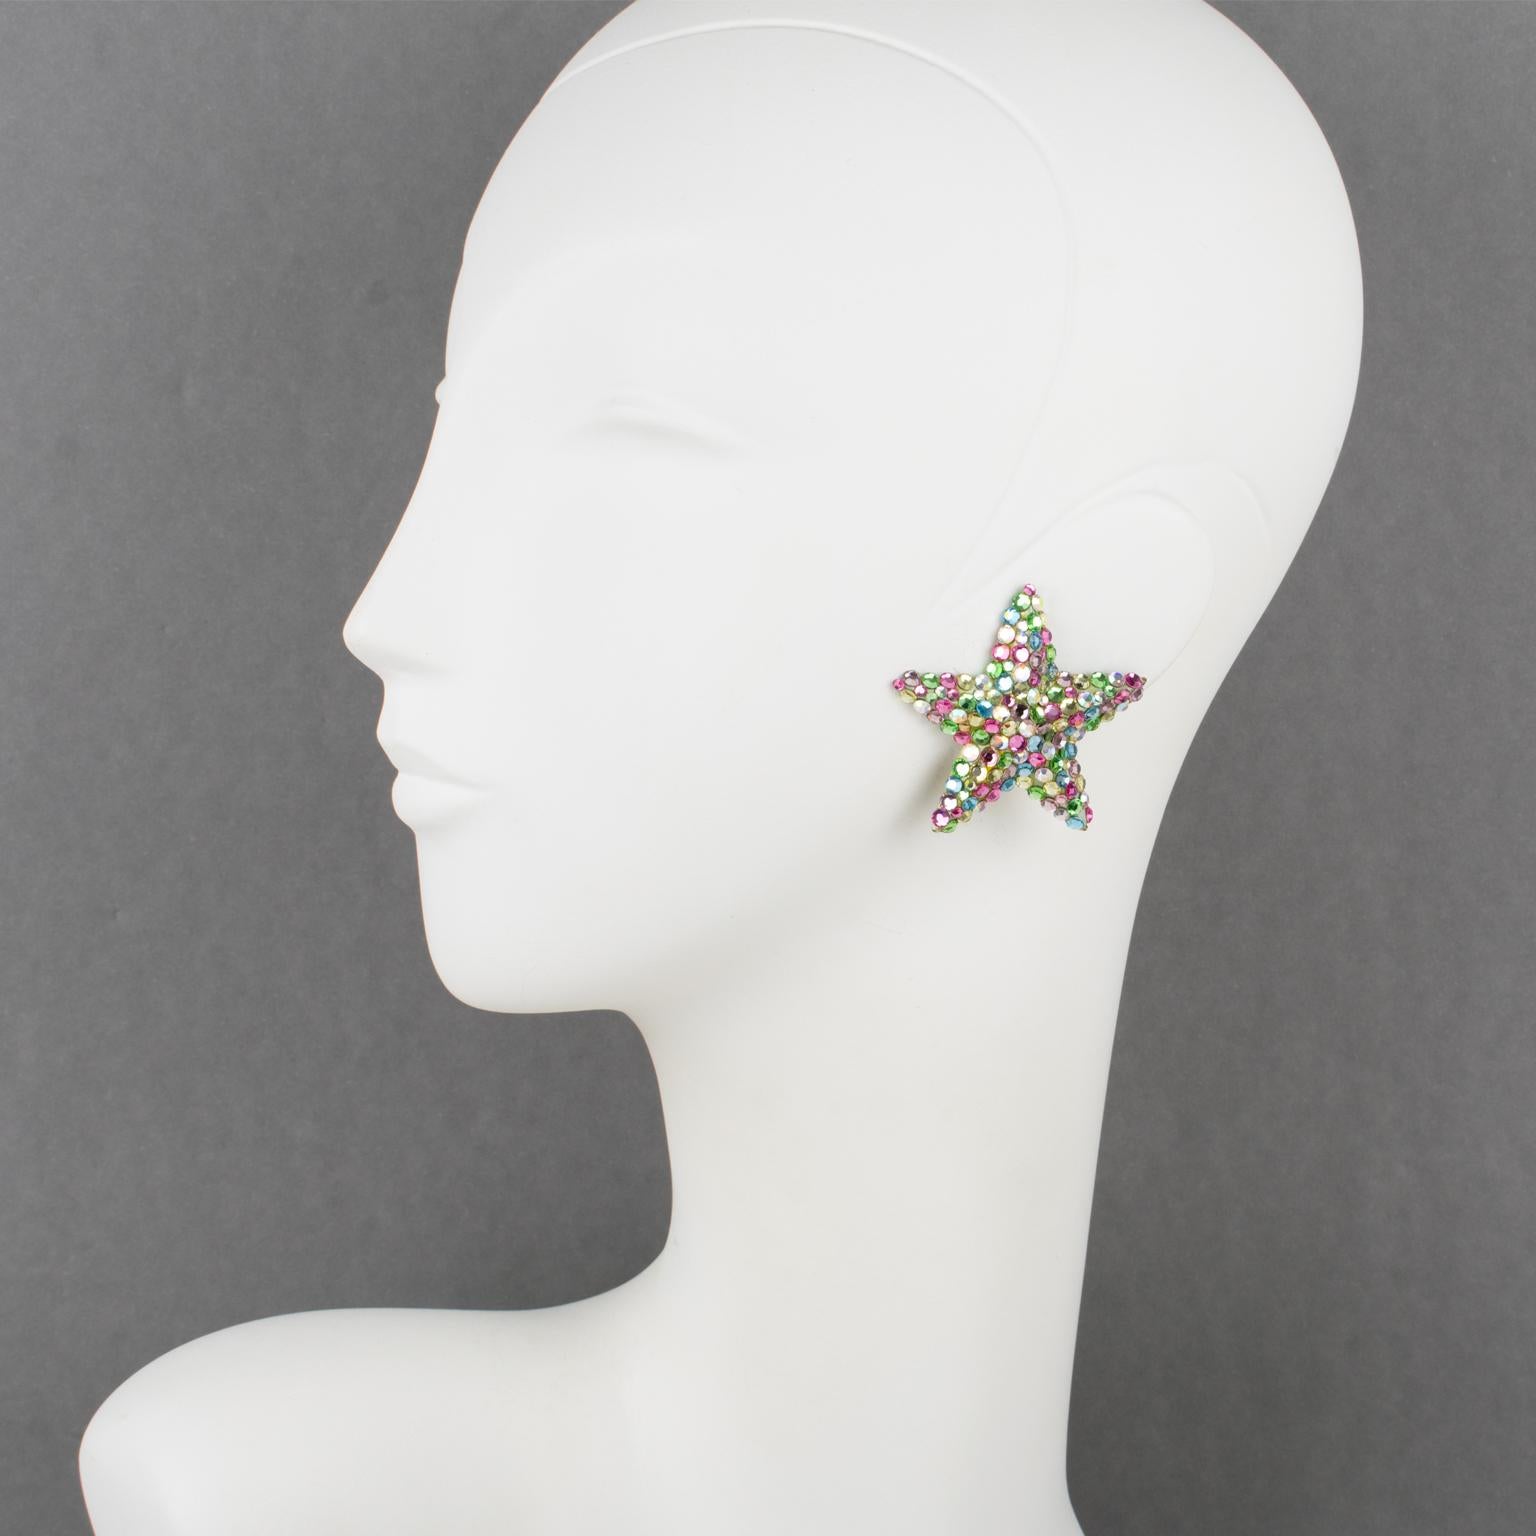 Lovely statement clip-on earrings designed by Richard Kerr in the 1980s. They are made of his signature pave rhinestones. 
They feature an oversized star shape covered with multicolor crystal rhinestones. A beige resin background frame. Assorted